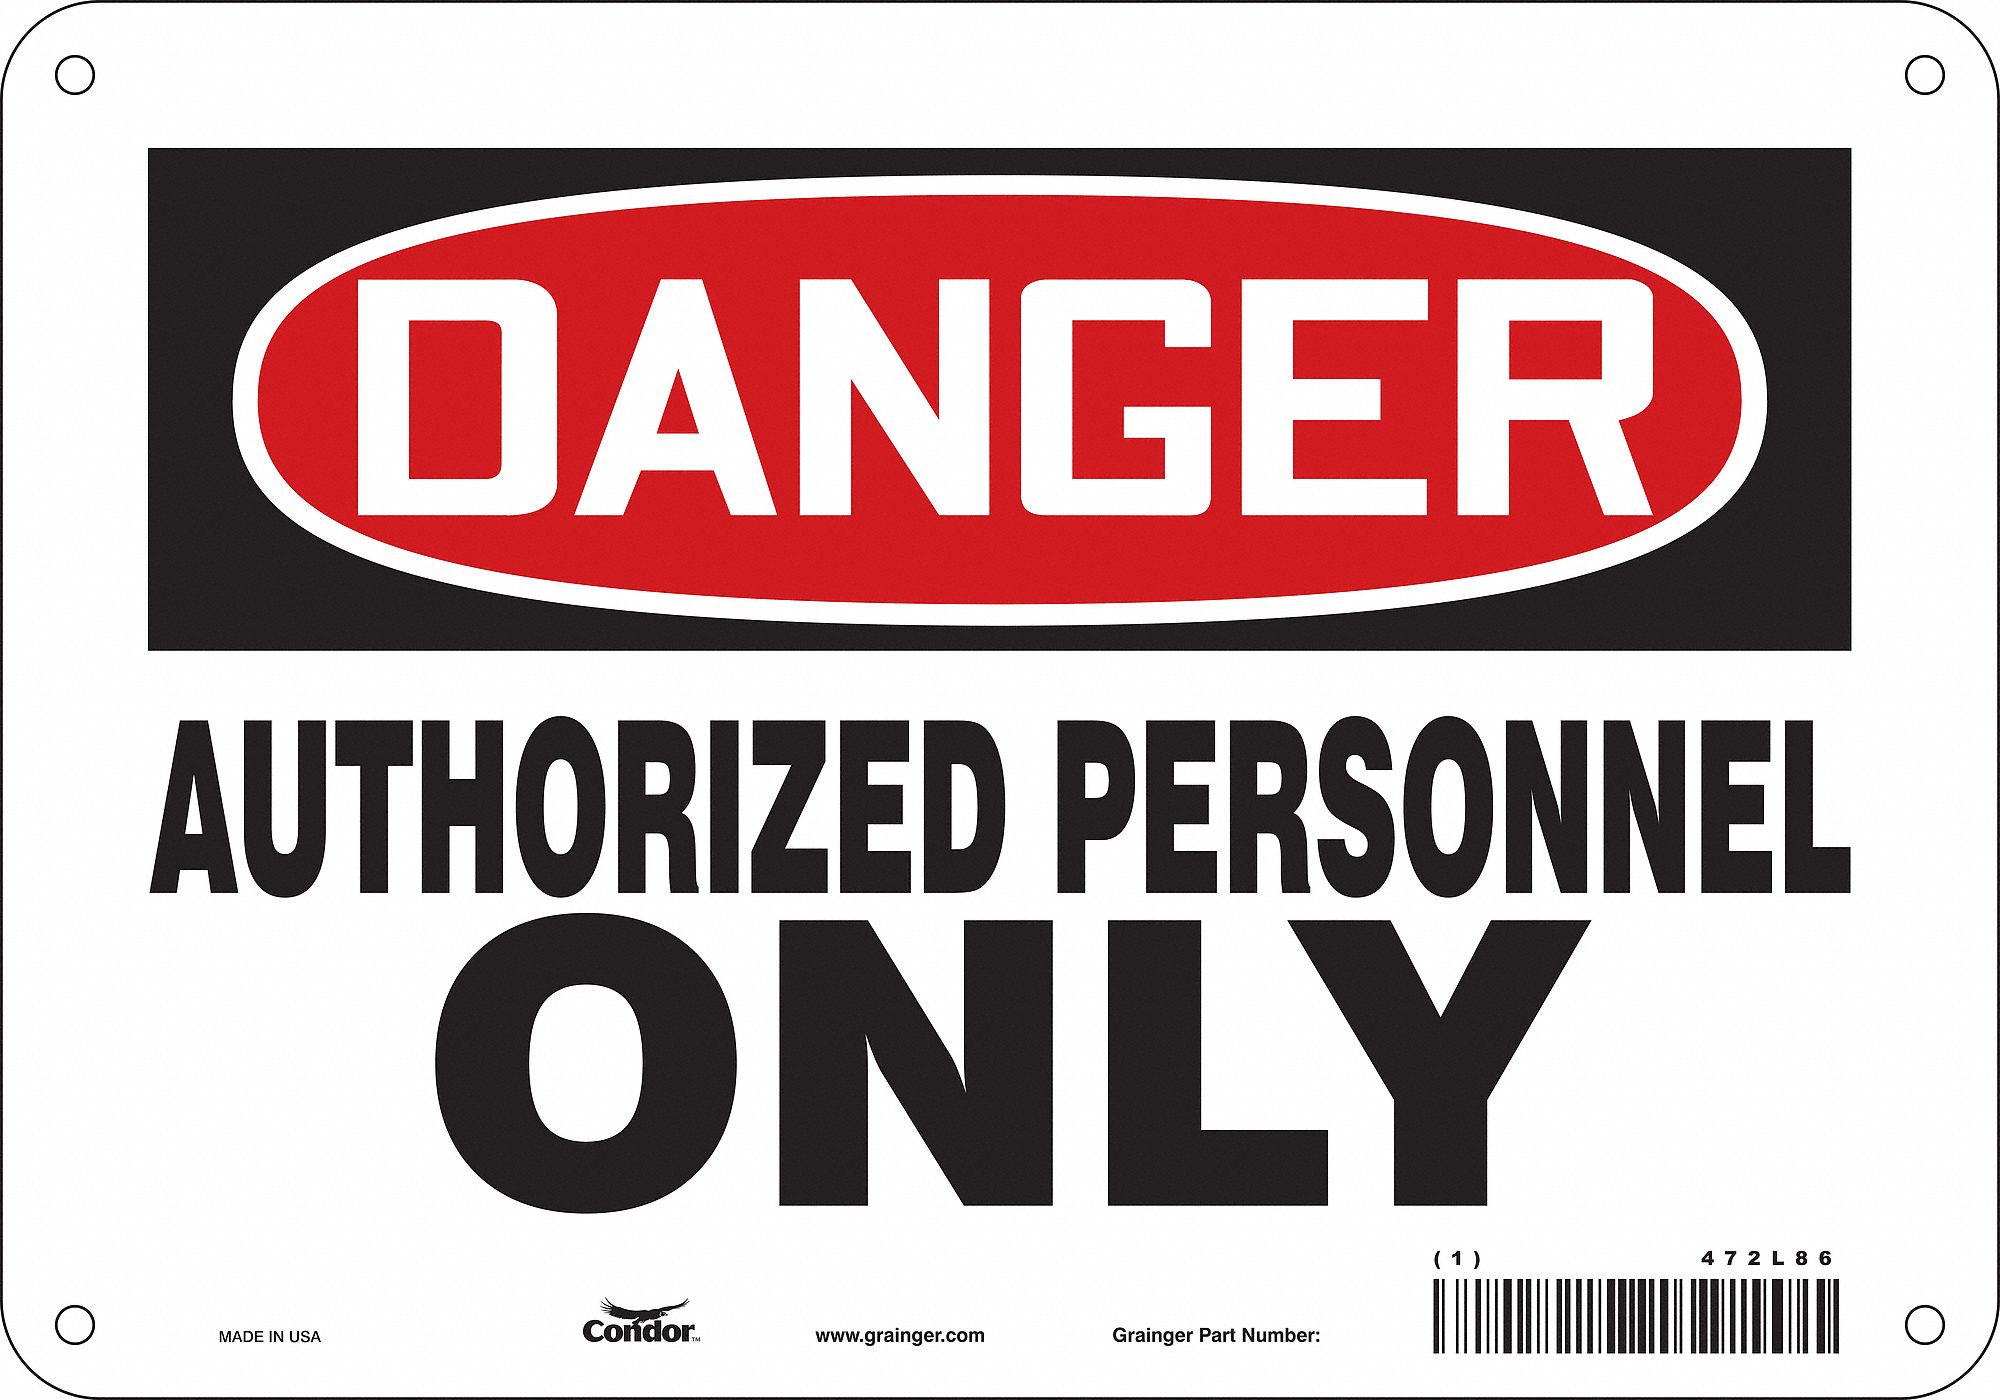 Signs & Facility Identification Products